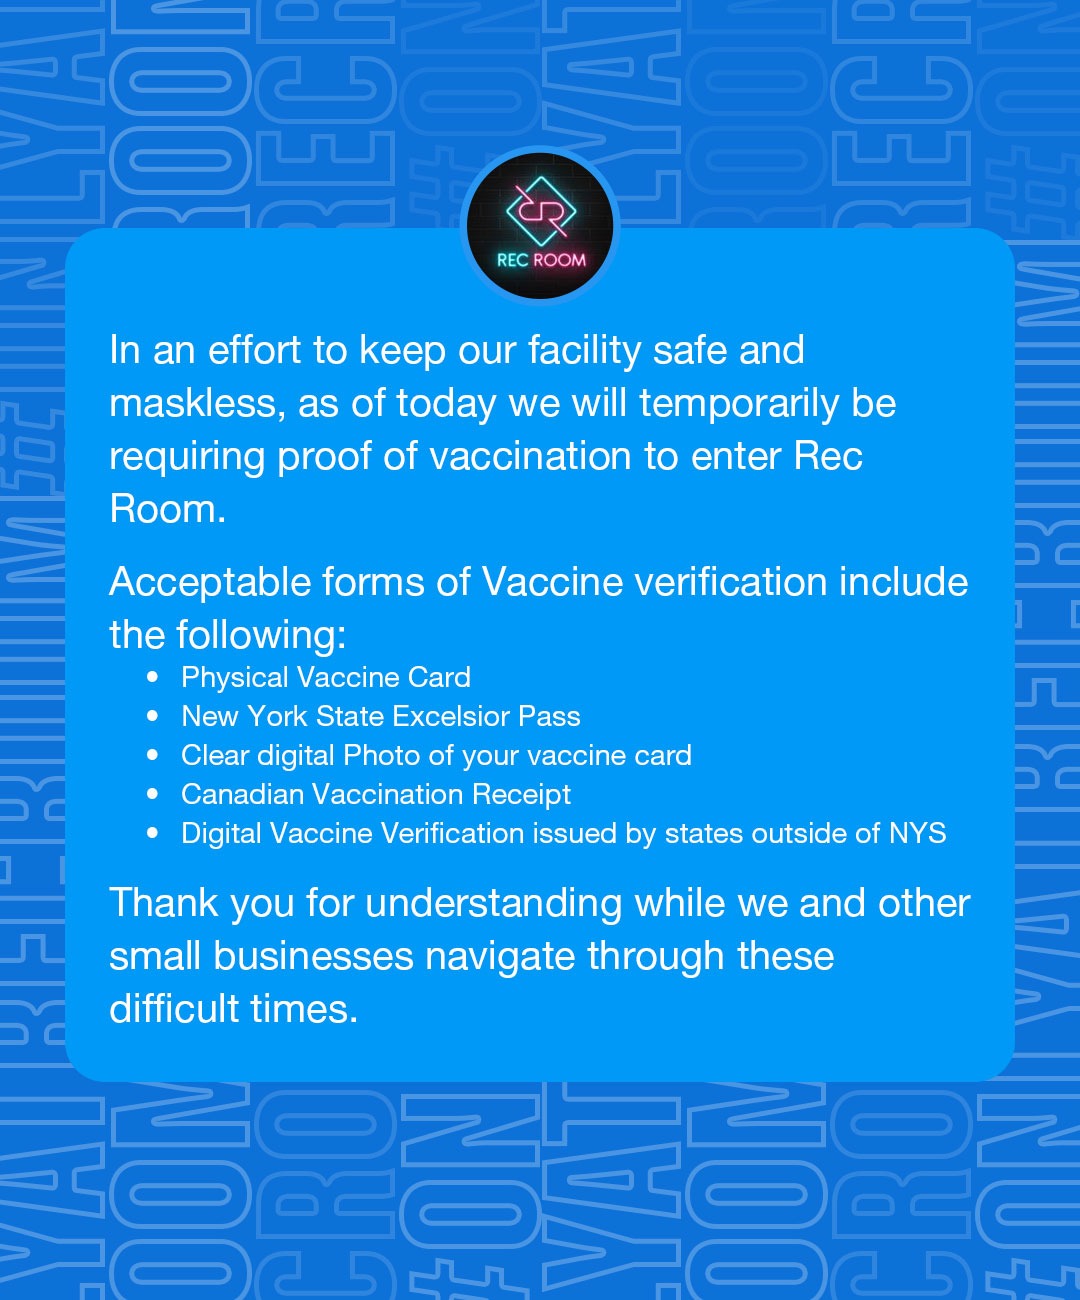 In an effort to keep our facility safe and maskless, as of today we will temporarily be requiring proof of vaccination to enter Rec Room.